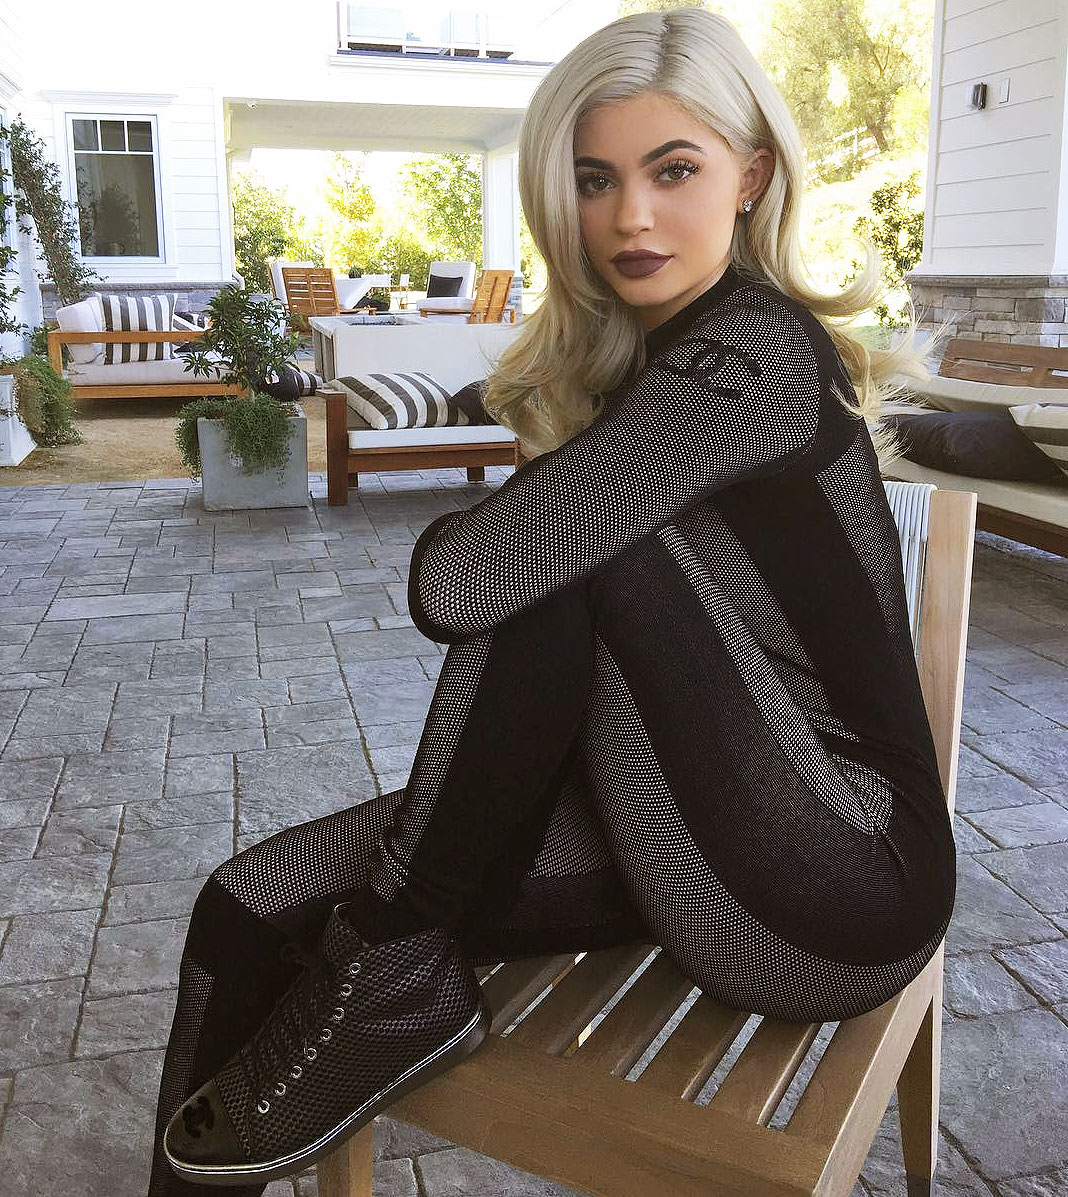 Inside Kylie Jenner S Snapchat House Tour Photos